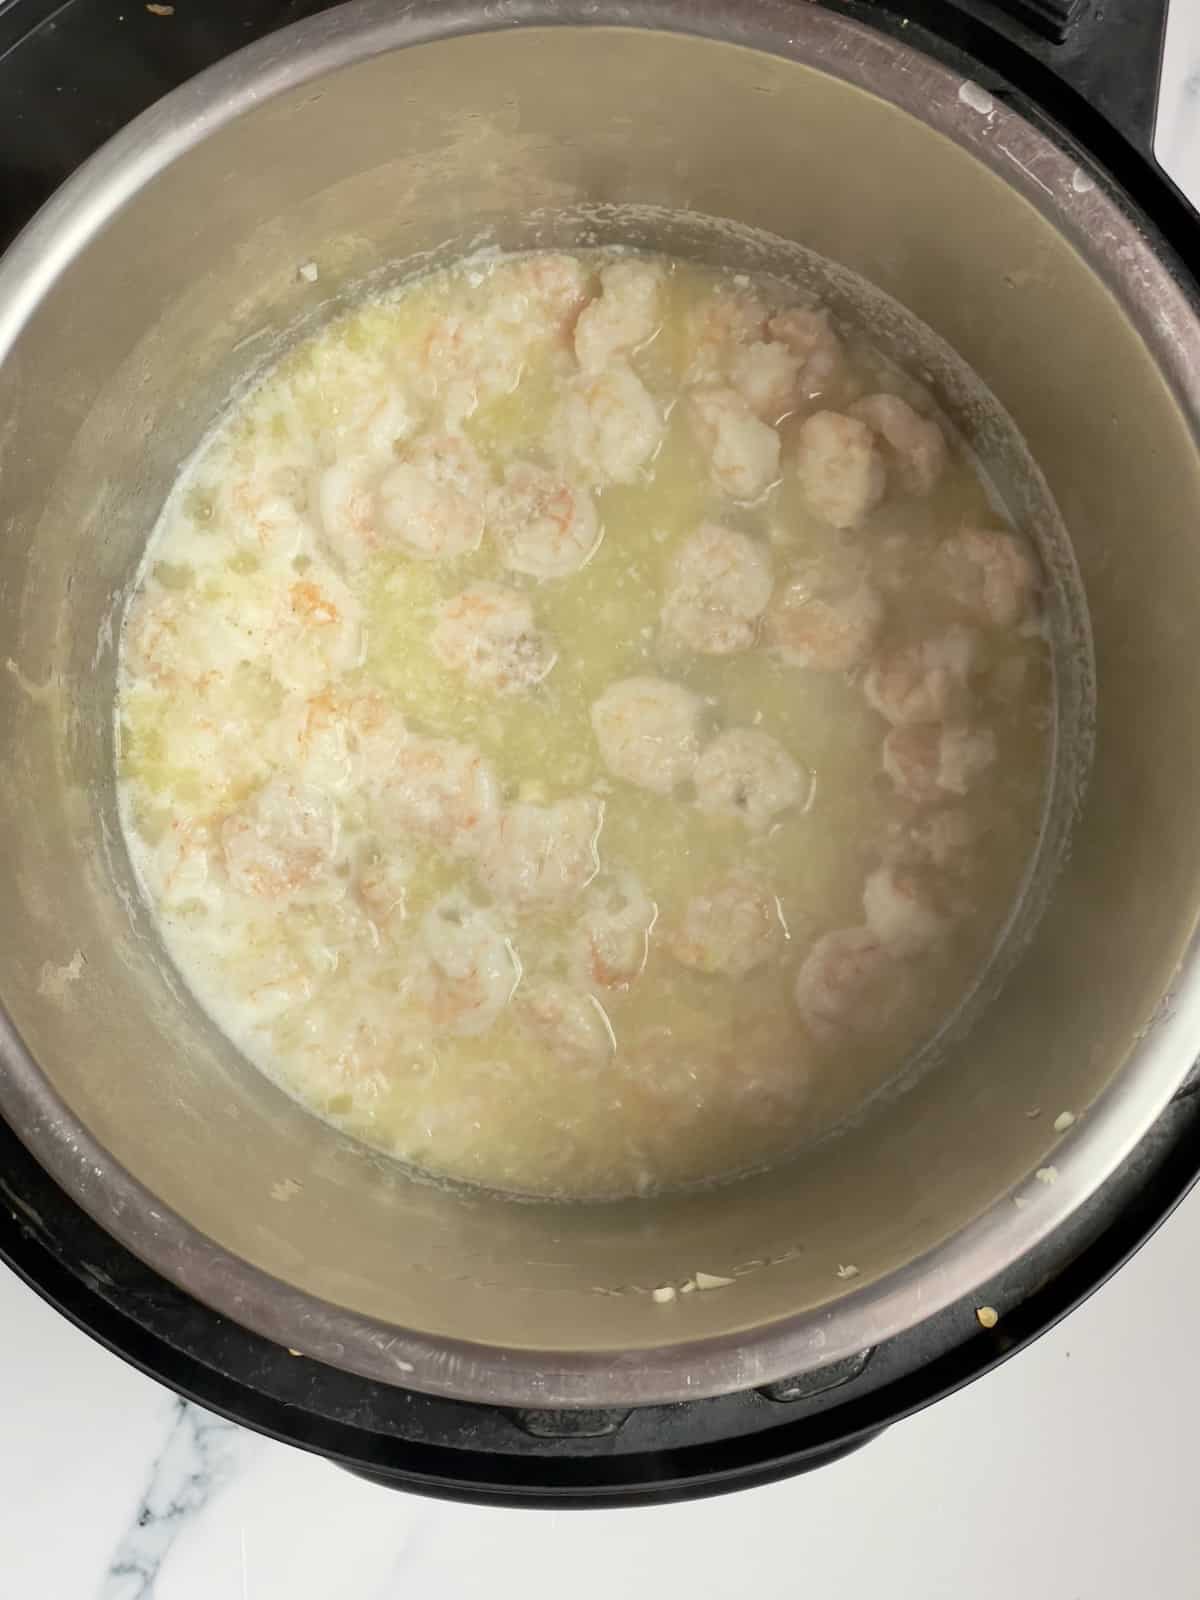 shrimp, shallots and garlic cooking in an inner pot